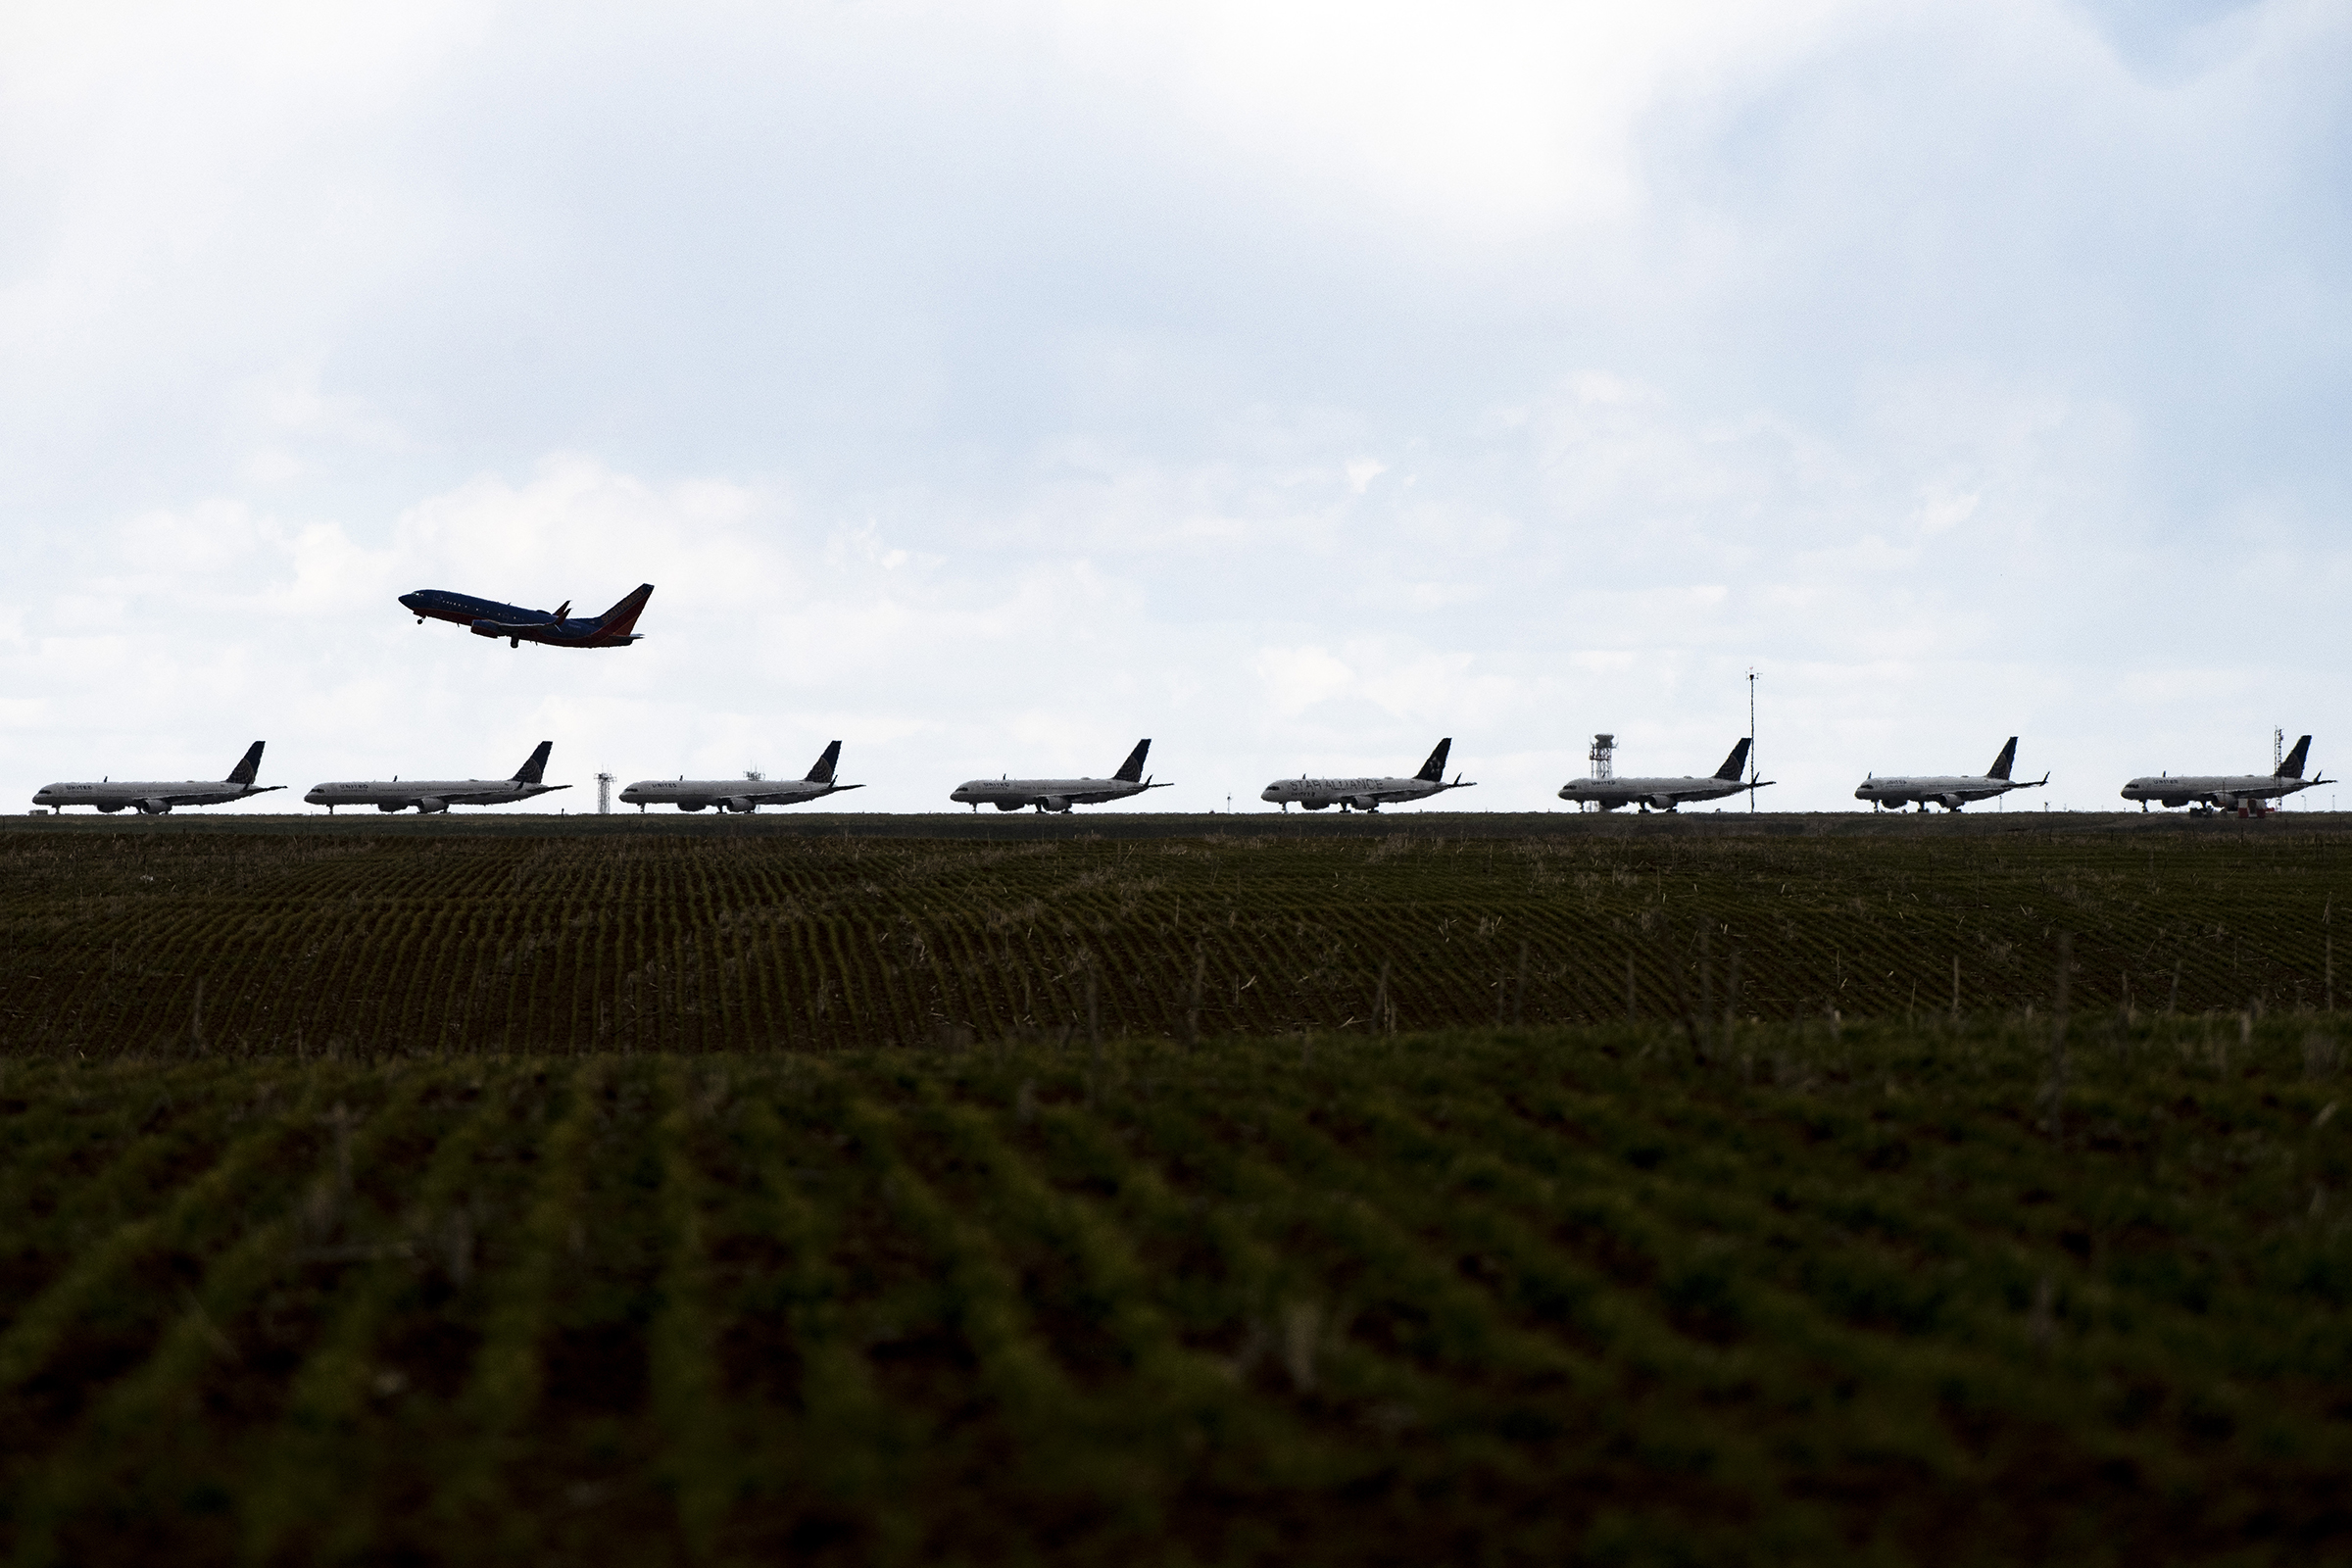 A Southwest Airlines flight takes off as United Airlines planes sit parked on a runway at Denver International Airport on April 22, 2020 in Denver, Colorado. (Michael Ciaglo—Getty Images)